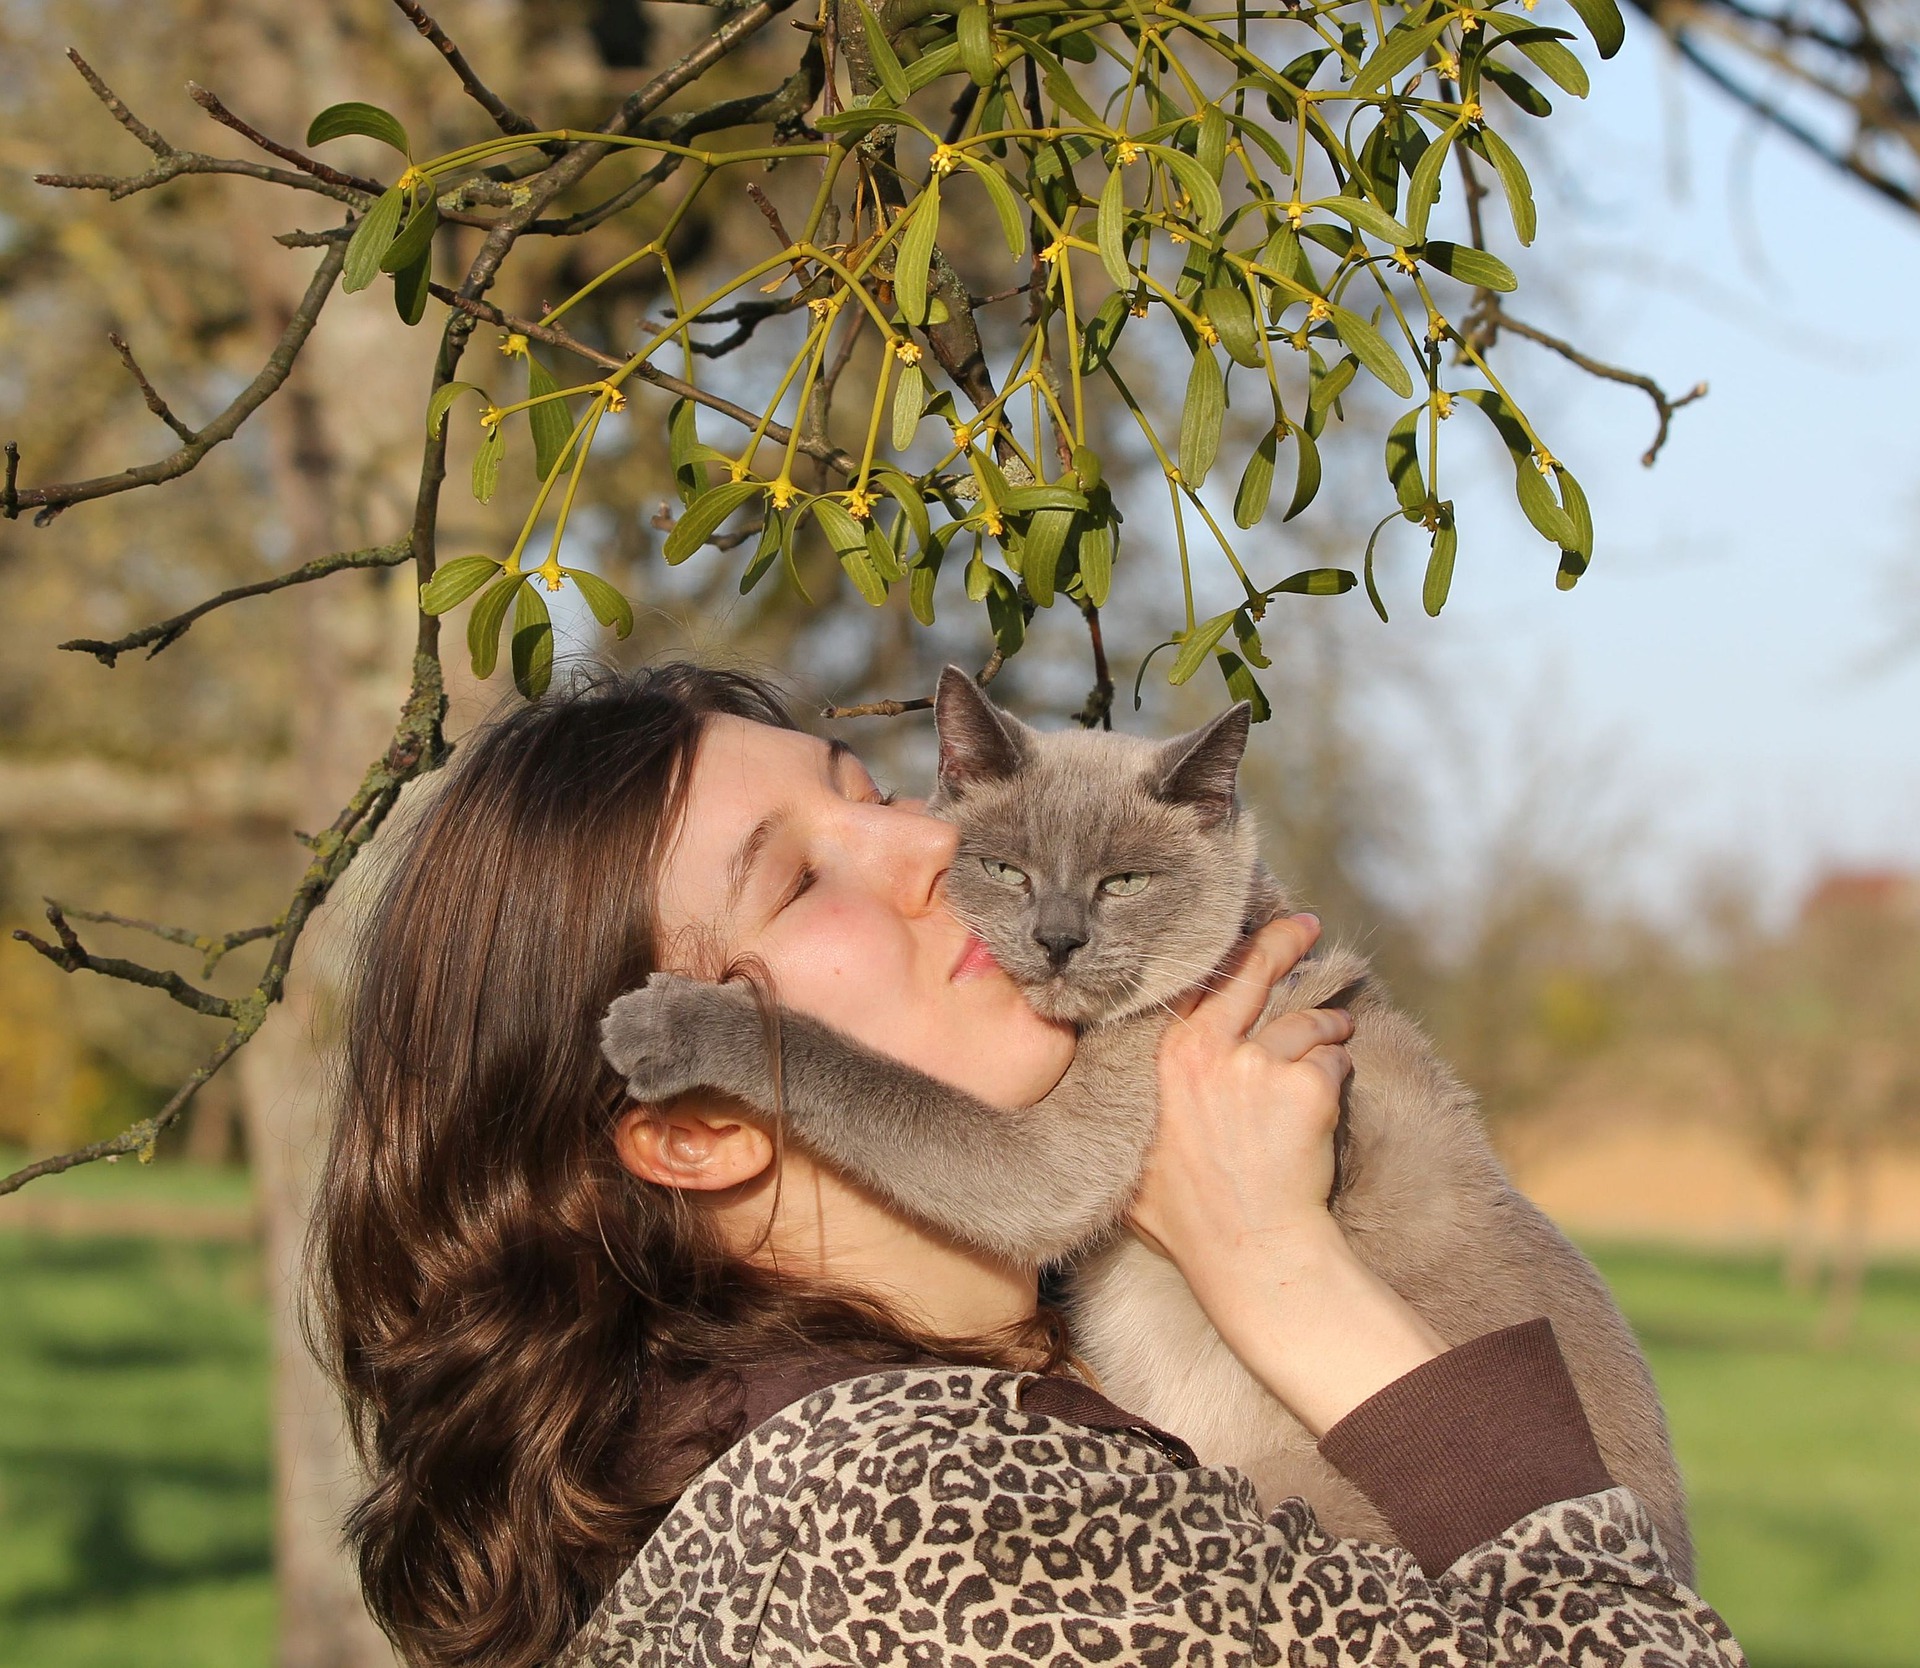 Can Cats Understand Human Emotion?